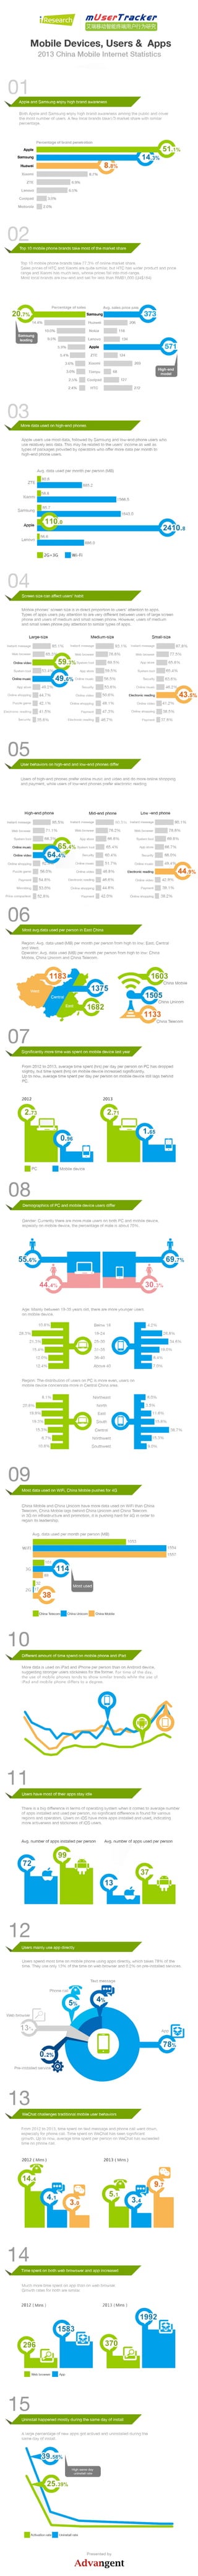 Infographic: 2013 China Mobile Internet Stats - Devices, Users and Apps